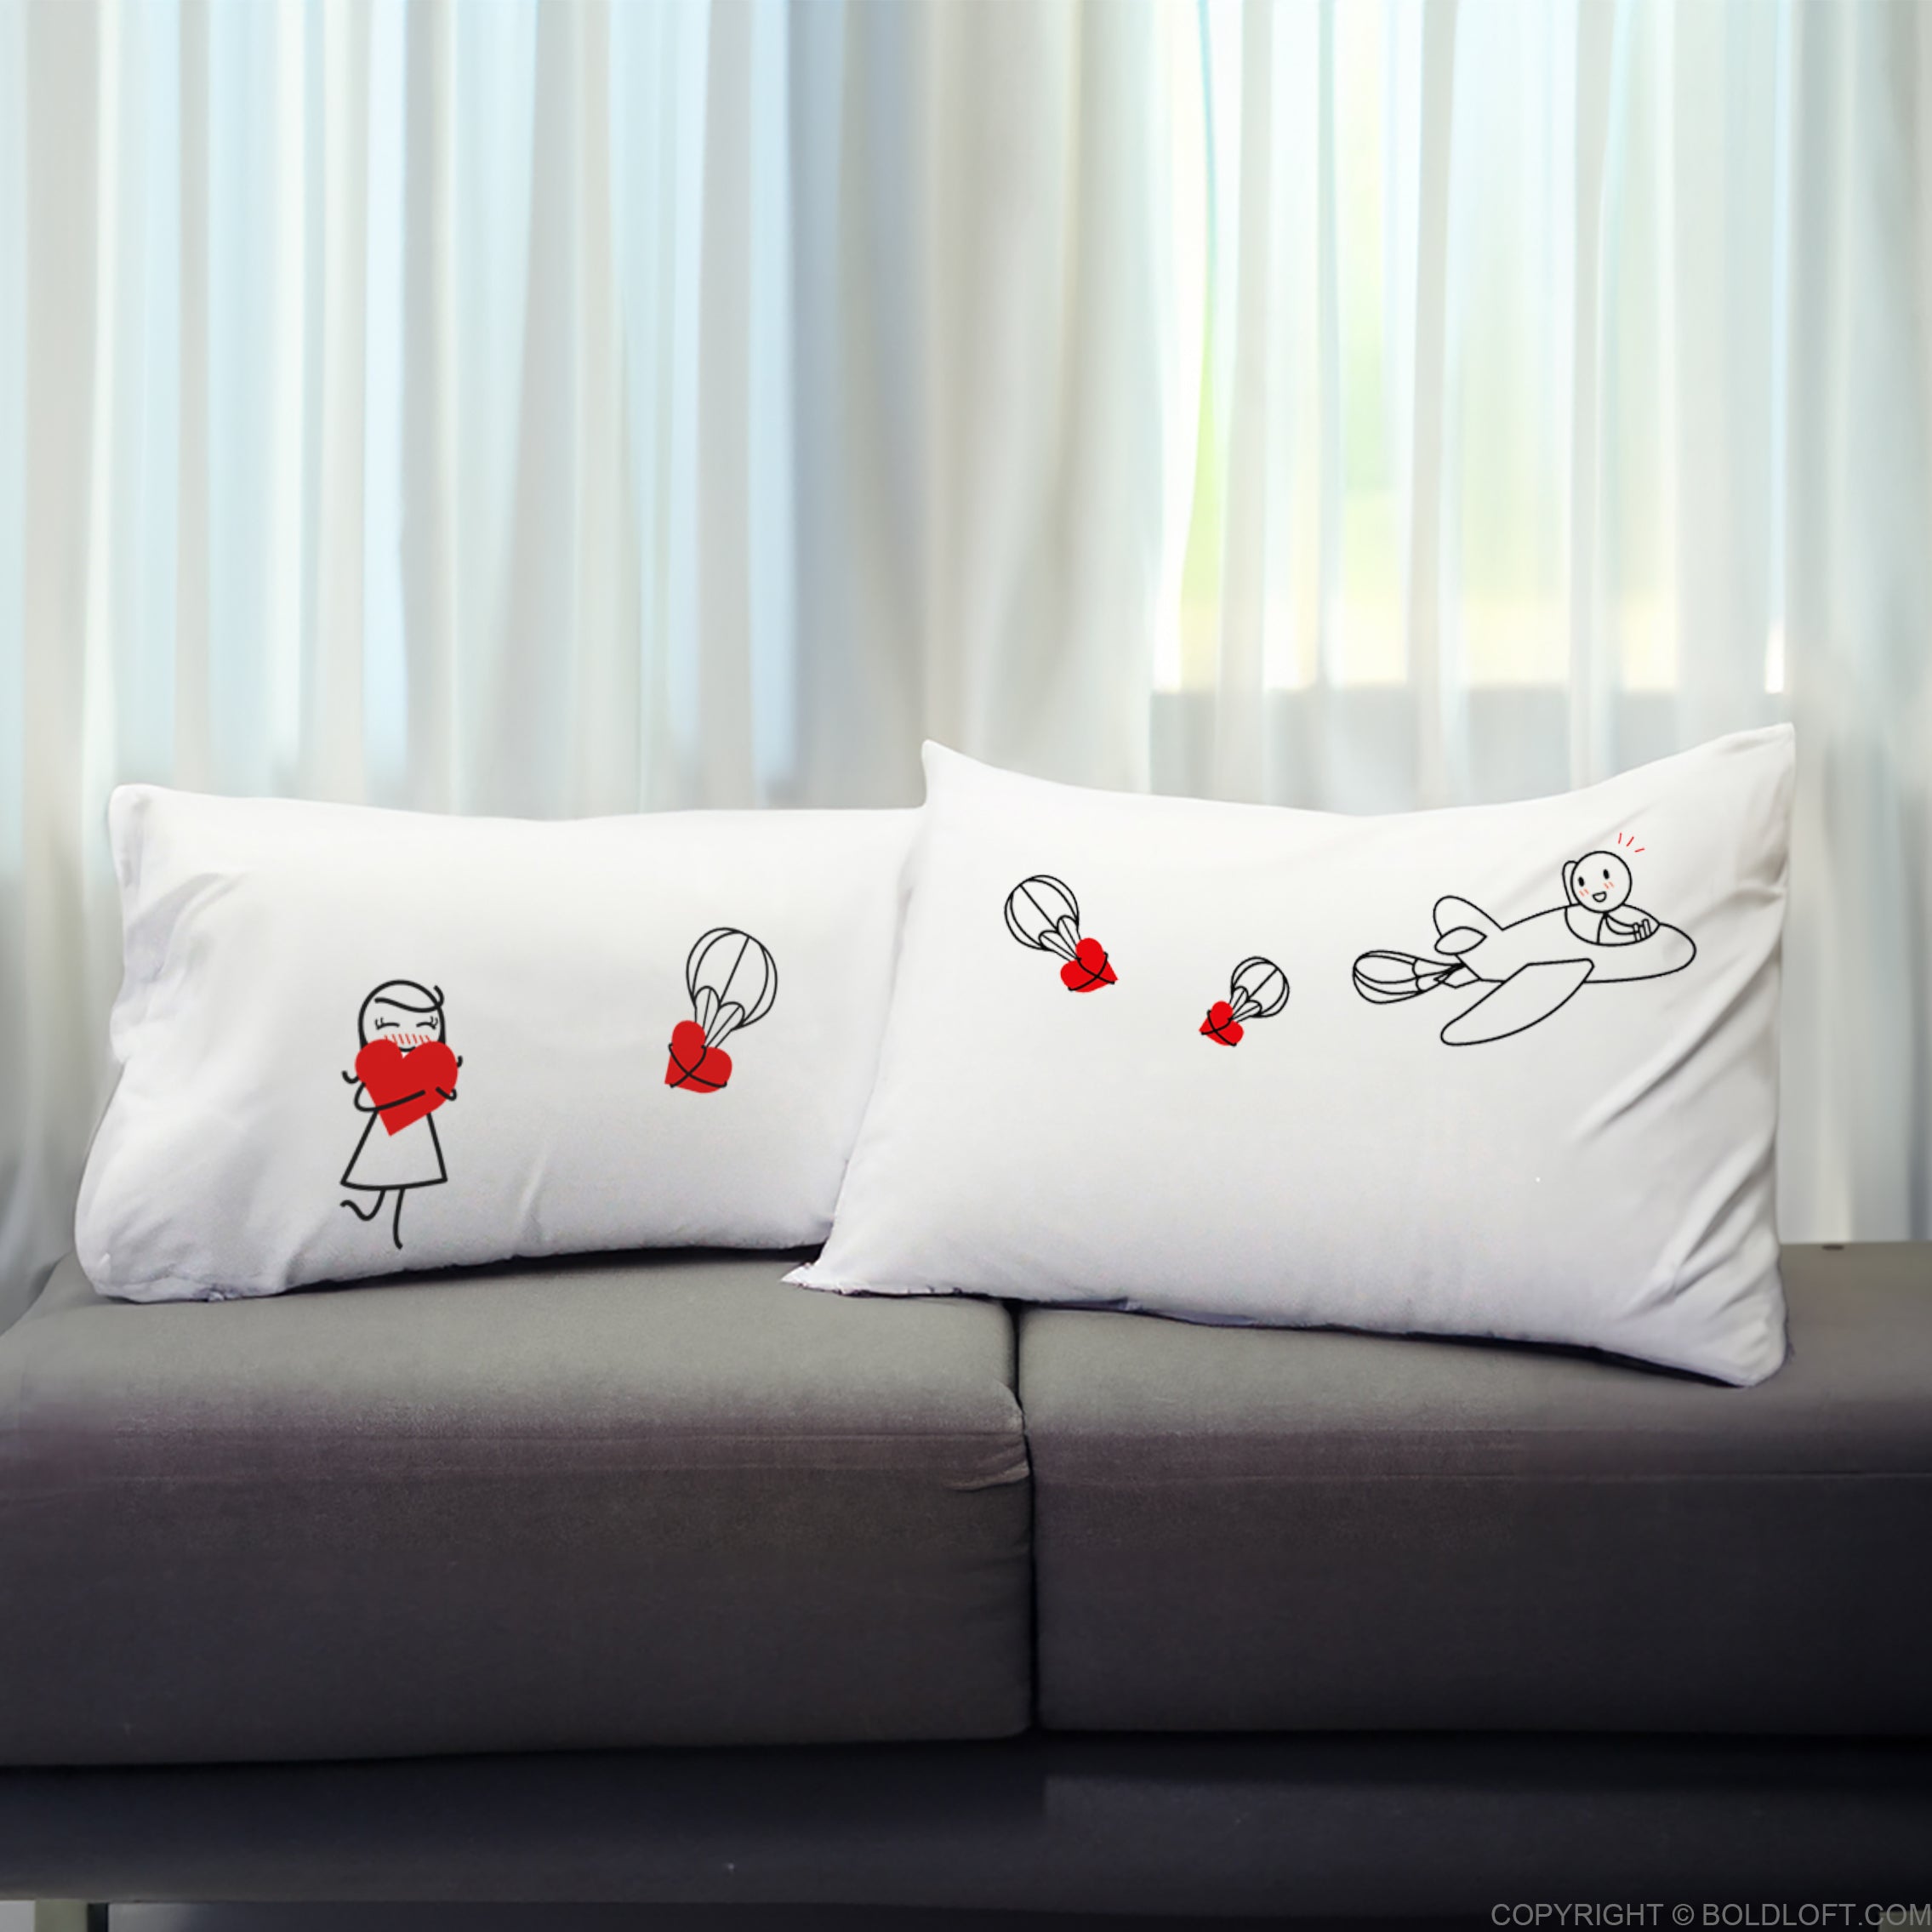 BoldLoft No Matter the Distance Couple Pillowcases-his and hers pillowcases for long distance relationships couples feature 2 stick figures, a plane, and heart ballons